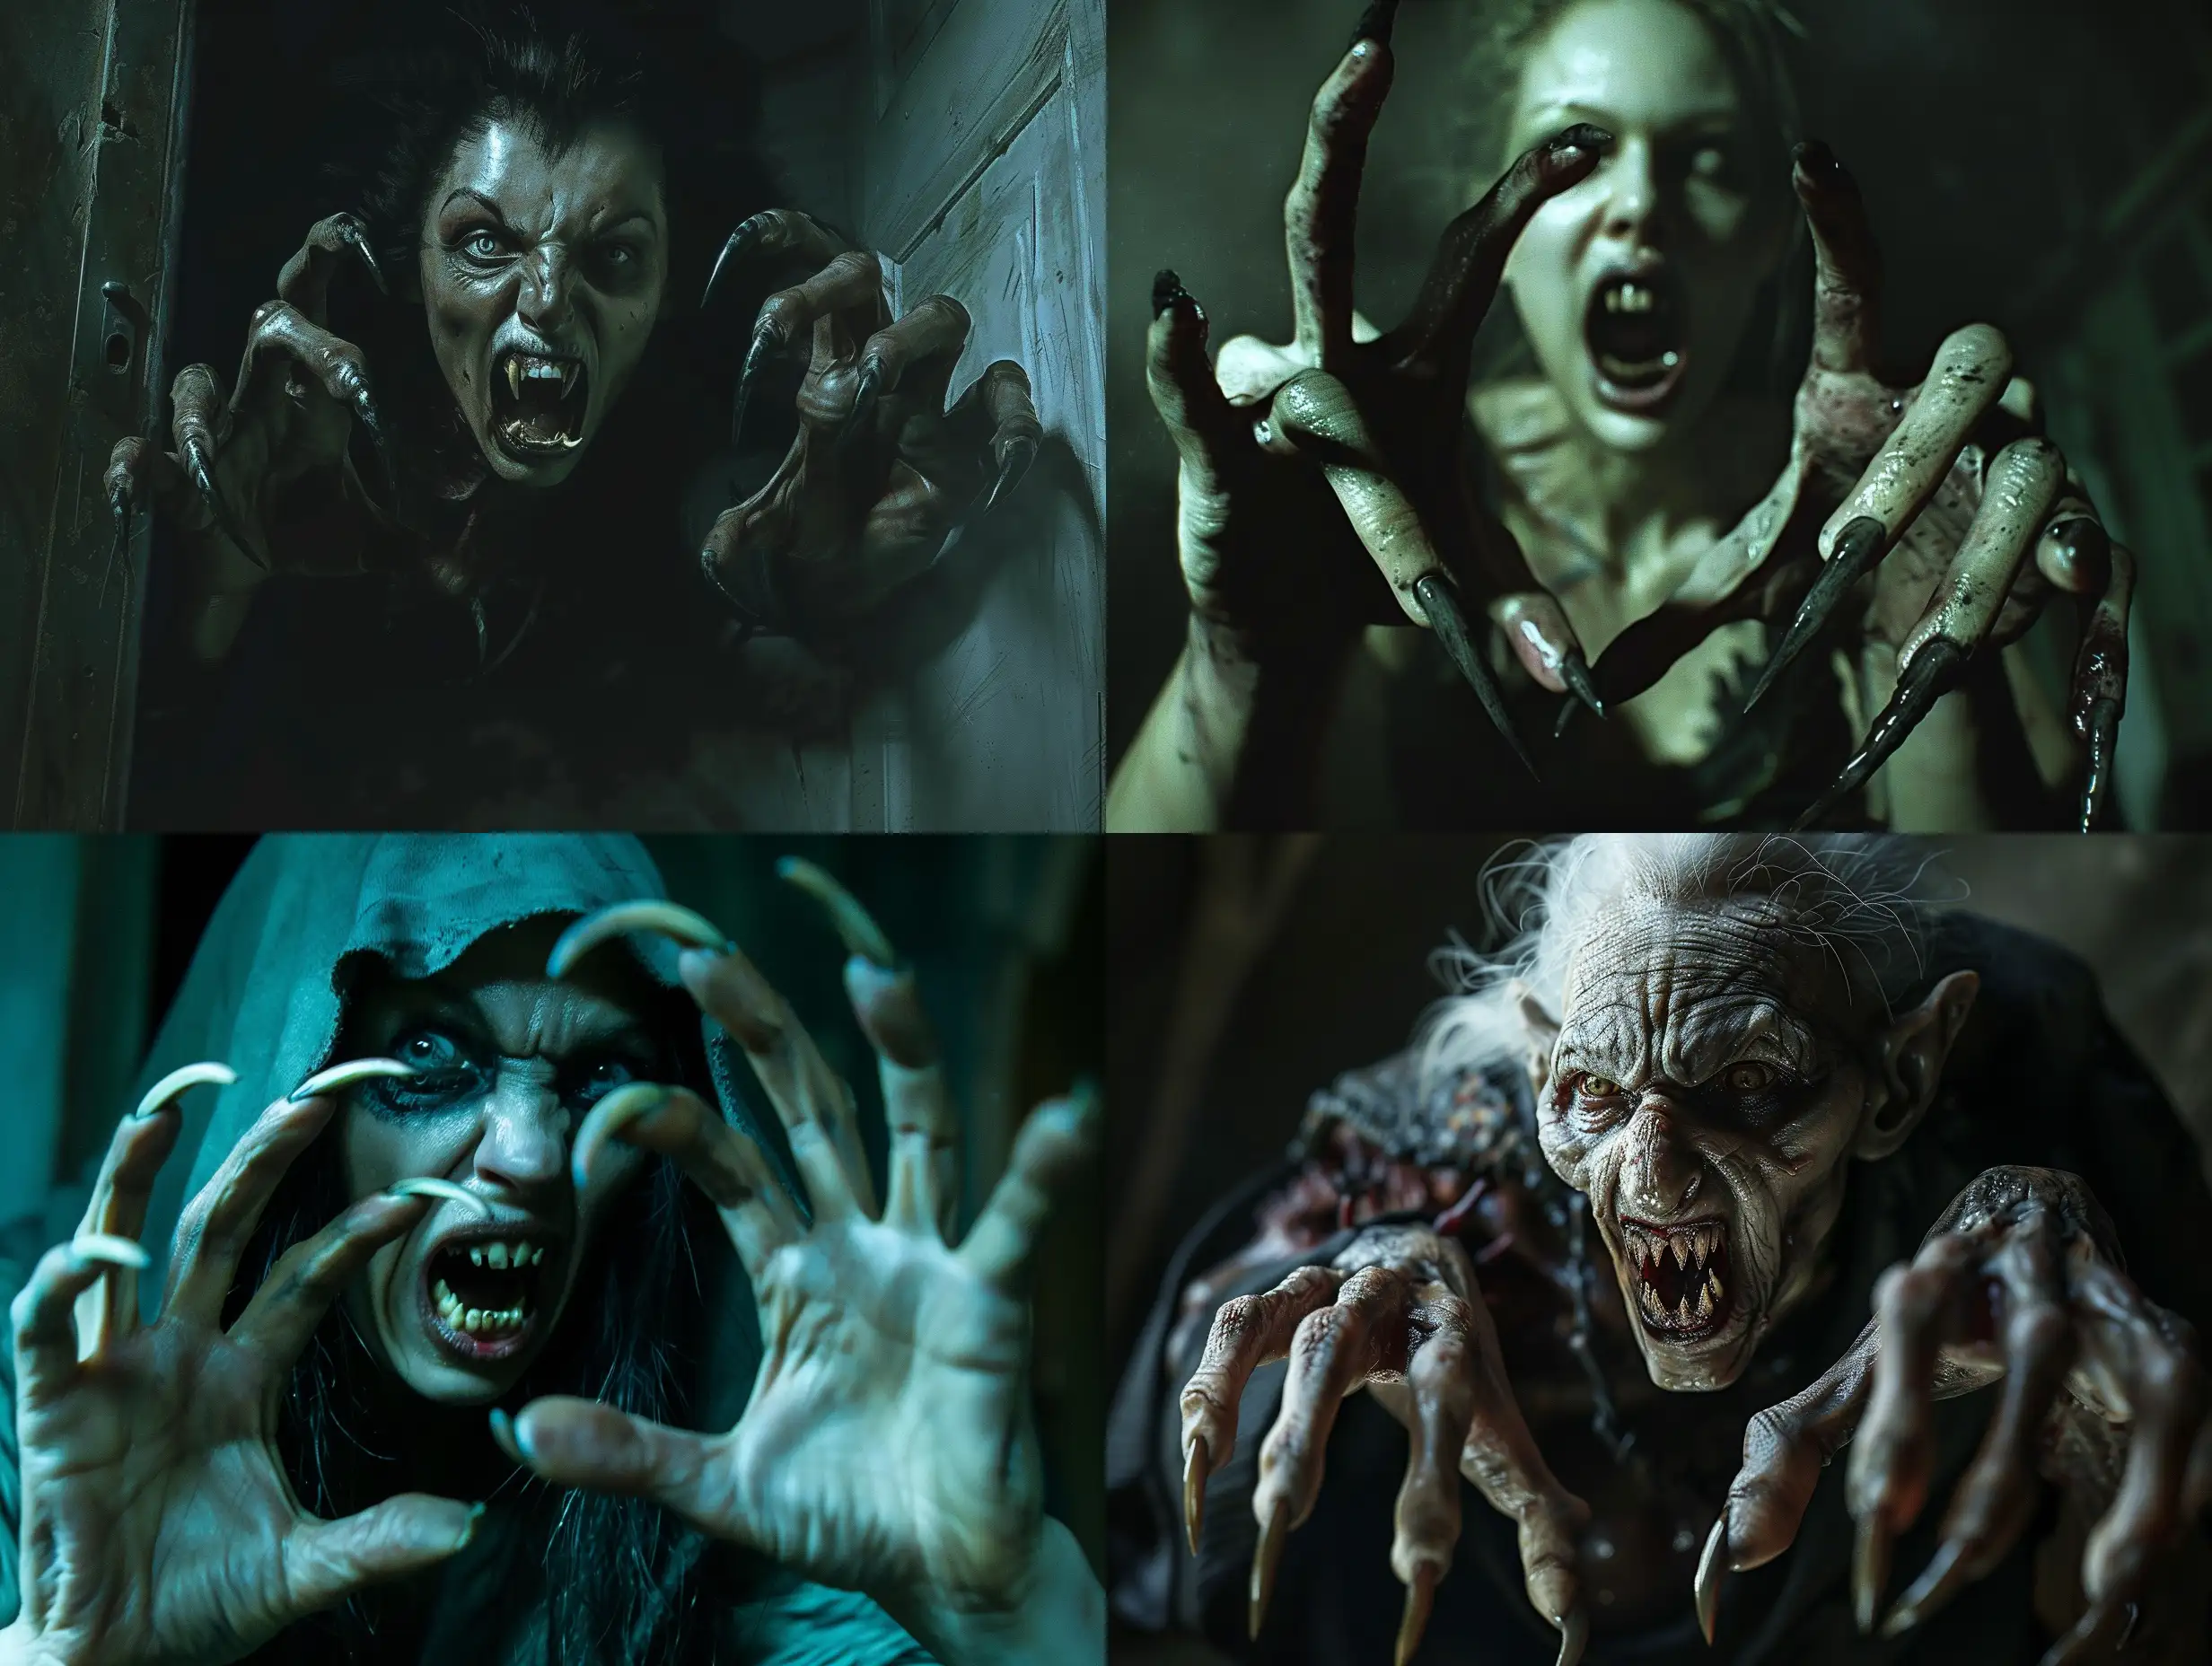 Subject: The main subject of the image is a wild and ugly vampire woman, depicted in a photorealistic style. She has extra long pointed fingernails resembling claws, and her mouth is open with fang-like teeth, giving her a threatening appearance.
Setting: The scene is set inside a dark room, adding to the eerie atmosphere. The darkness enhances the horror element and creates a cinematic feel.
Style/Coloring: The image is hyper-realistic with high detail and photo detailing, contributing to the photorealistic quality. The coloring is dark and haunting, with atmospheric lighting intensifying the creepy vibe.
Action/Items: The vampire woman appears to have just emerged from the darkness, adding a sense of suspense and fear. Her posture and expression convey aggression and terror.
Costume/Appearance: The vampire's appearance is grotesque and terrifying, with detailed nails and realistic anatomy, including five fingers on each hand. Her undead look suggests that she has climbed out of a grave.
Accessories: The vampire's only accessories are her long, pointed fingernails, which resemble the claws of a predator, enhancing her menacing appearance.